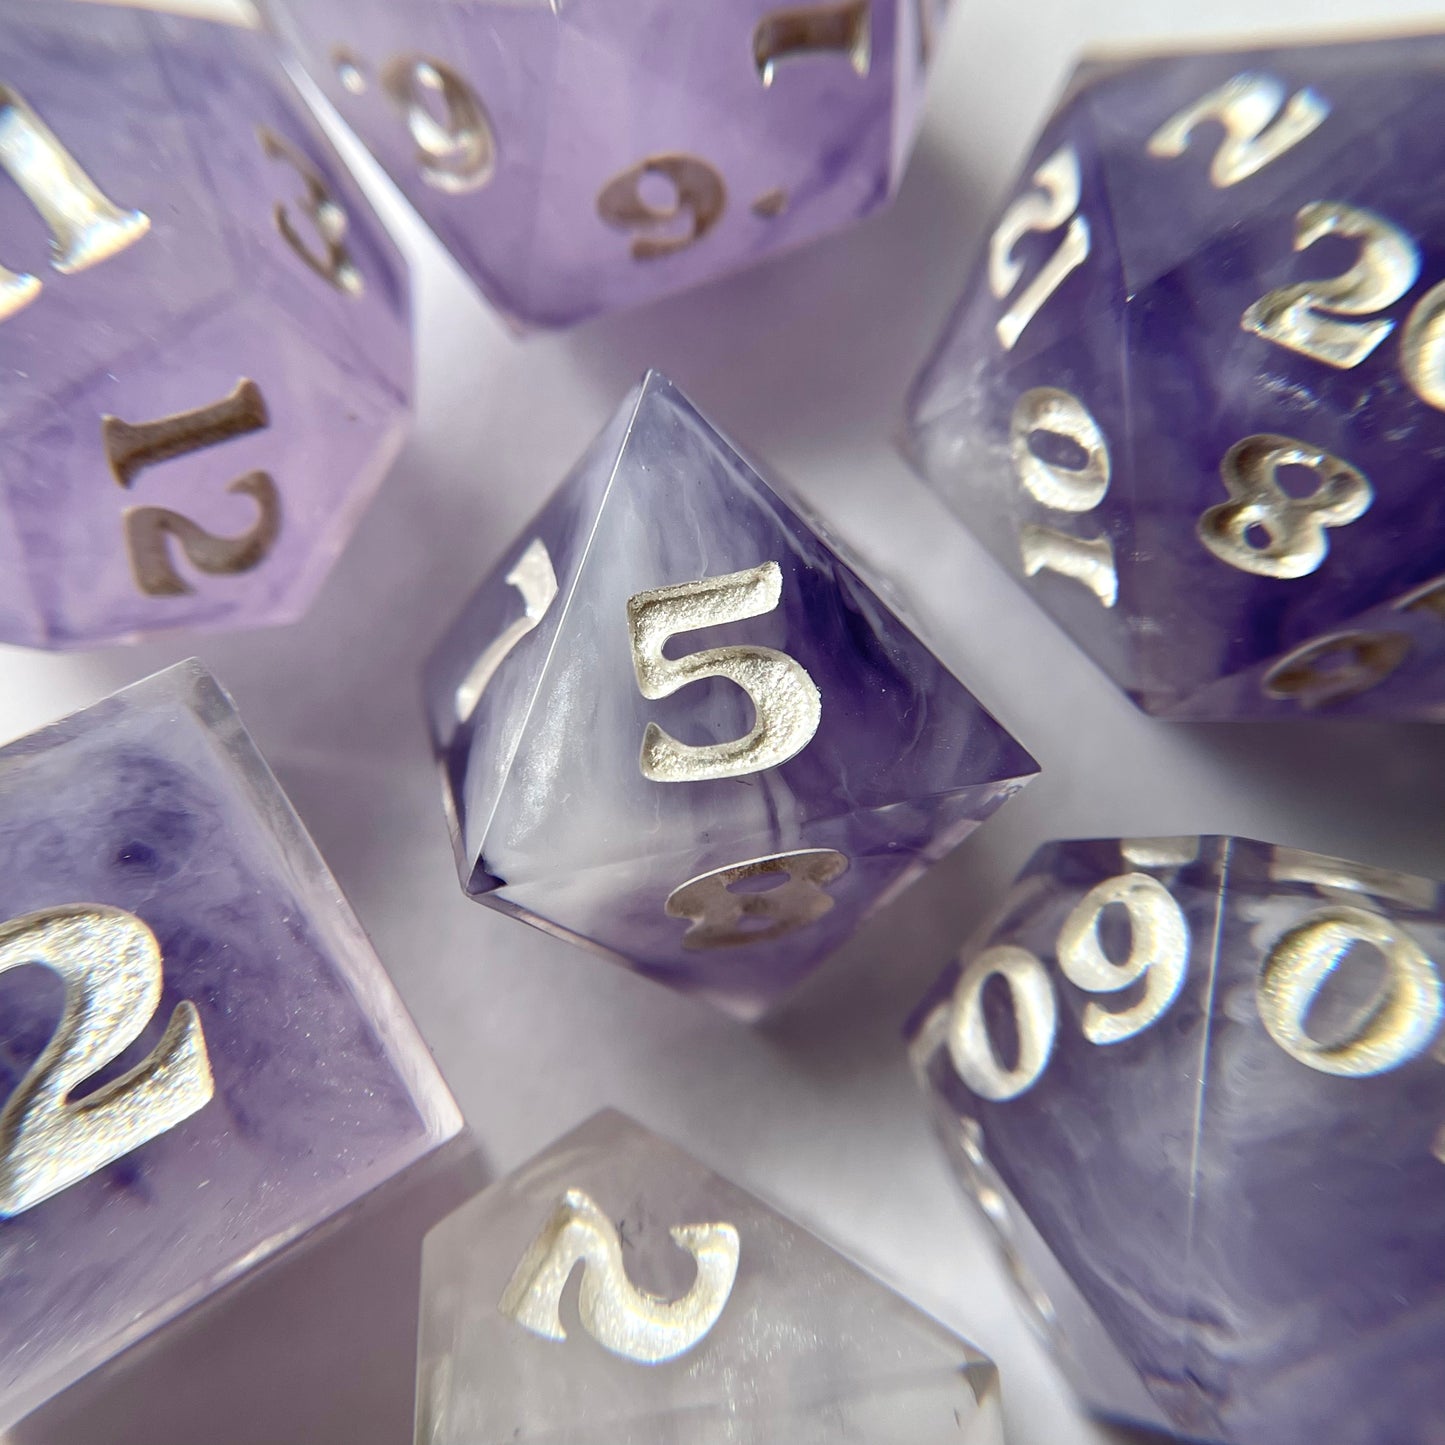 Kindred – 7-piece Polyhedral Dice Set